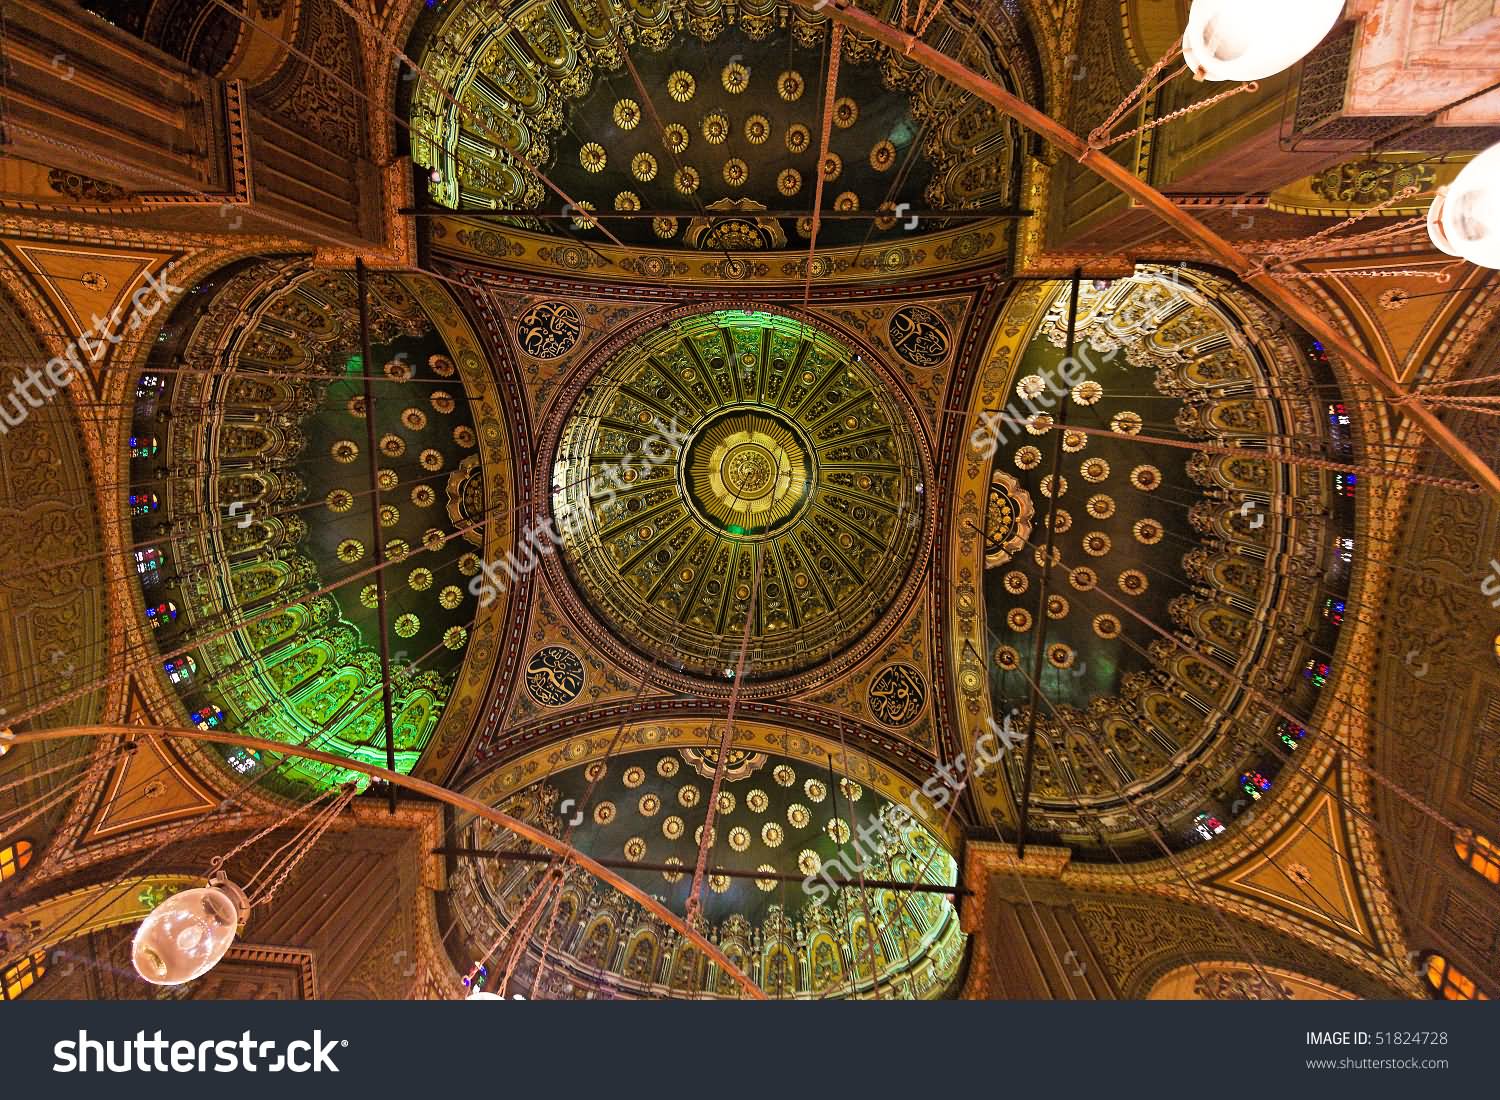 Majestic Ceiling Inside The Mosque Of Muhammad Ali, Cairo